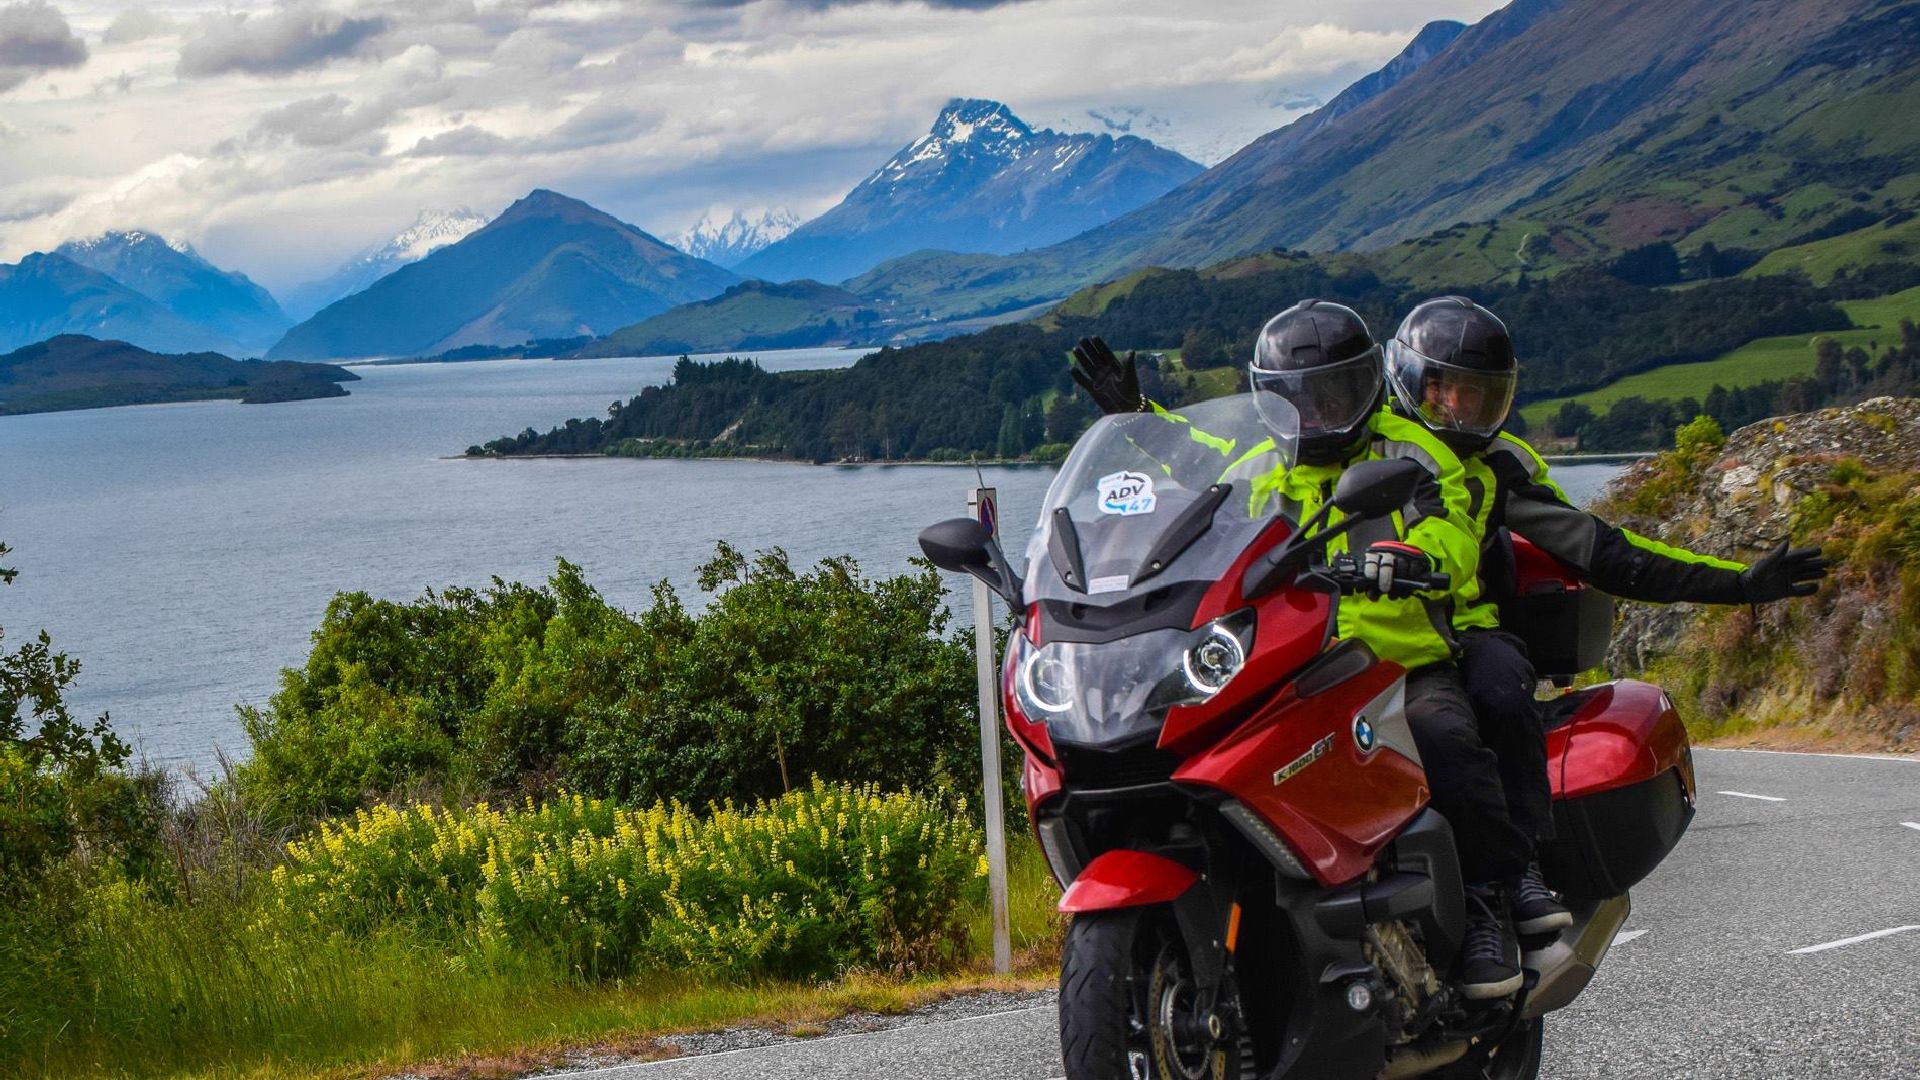 11 Day New Zealand South Island Motorbike SelfGuided Tour